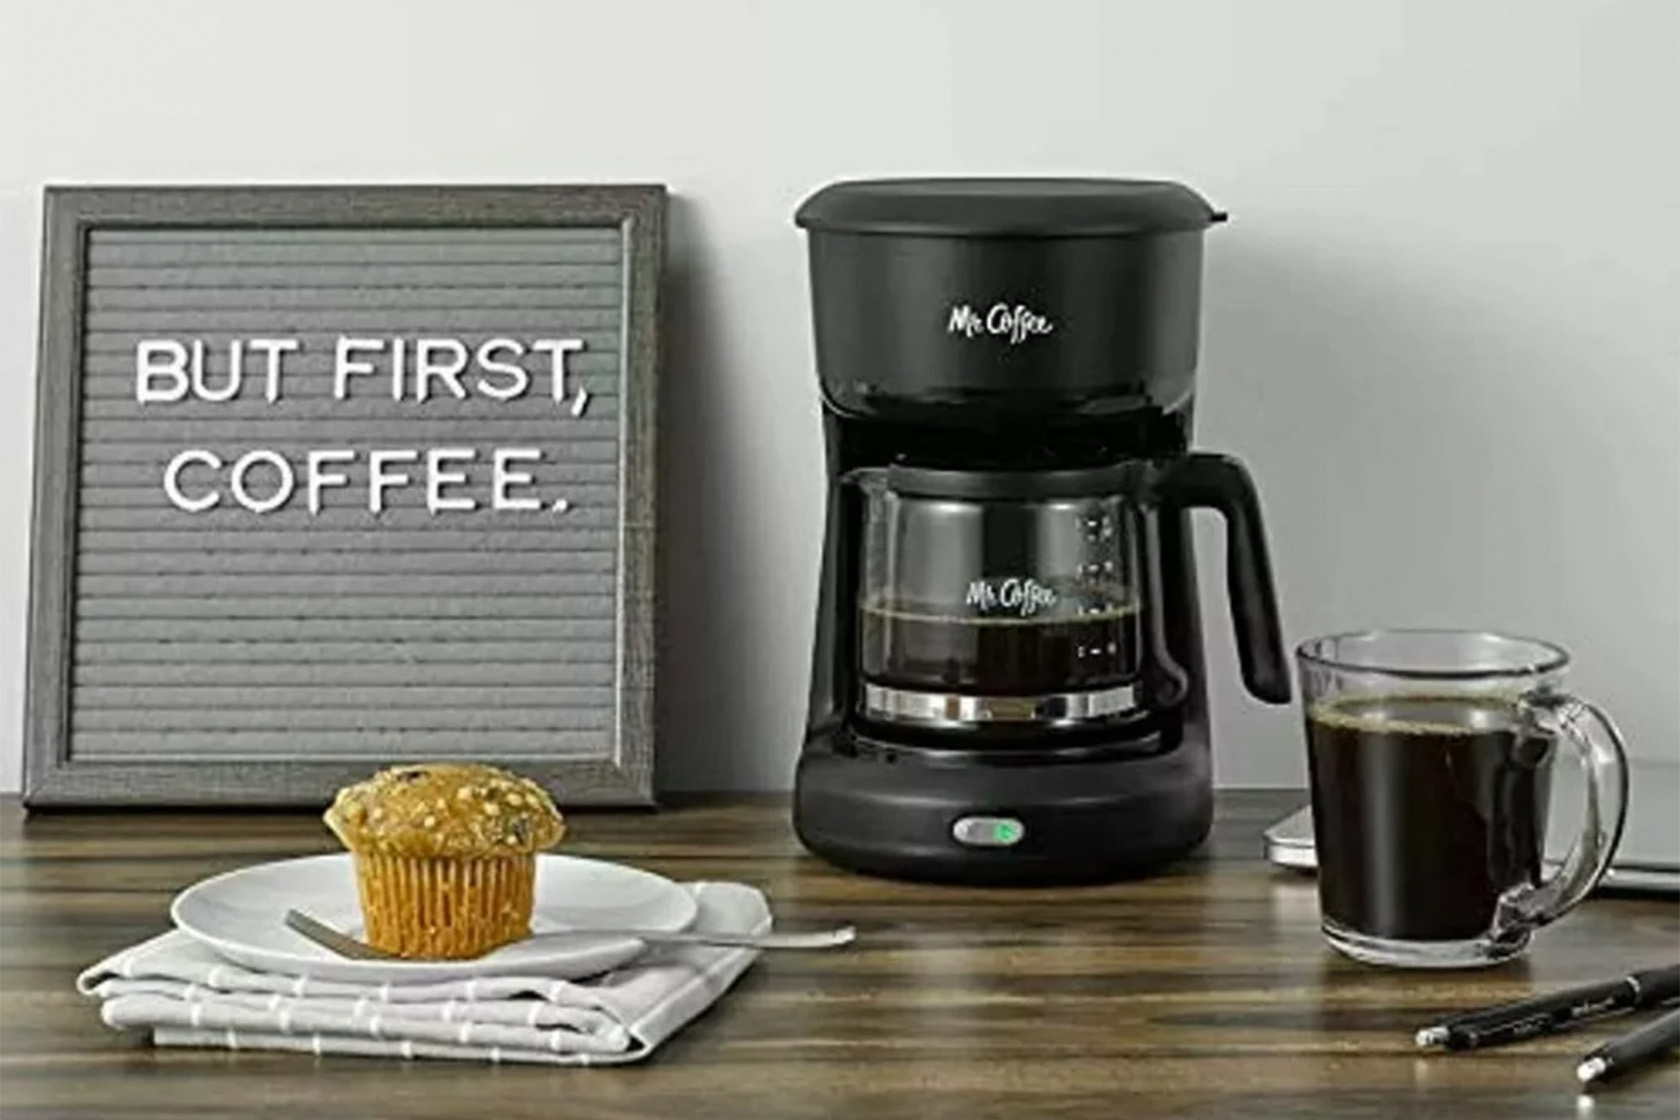 This Mr. Coffee mini brewer is only $15 on